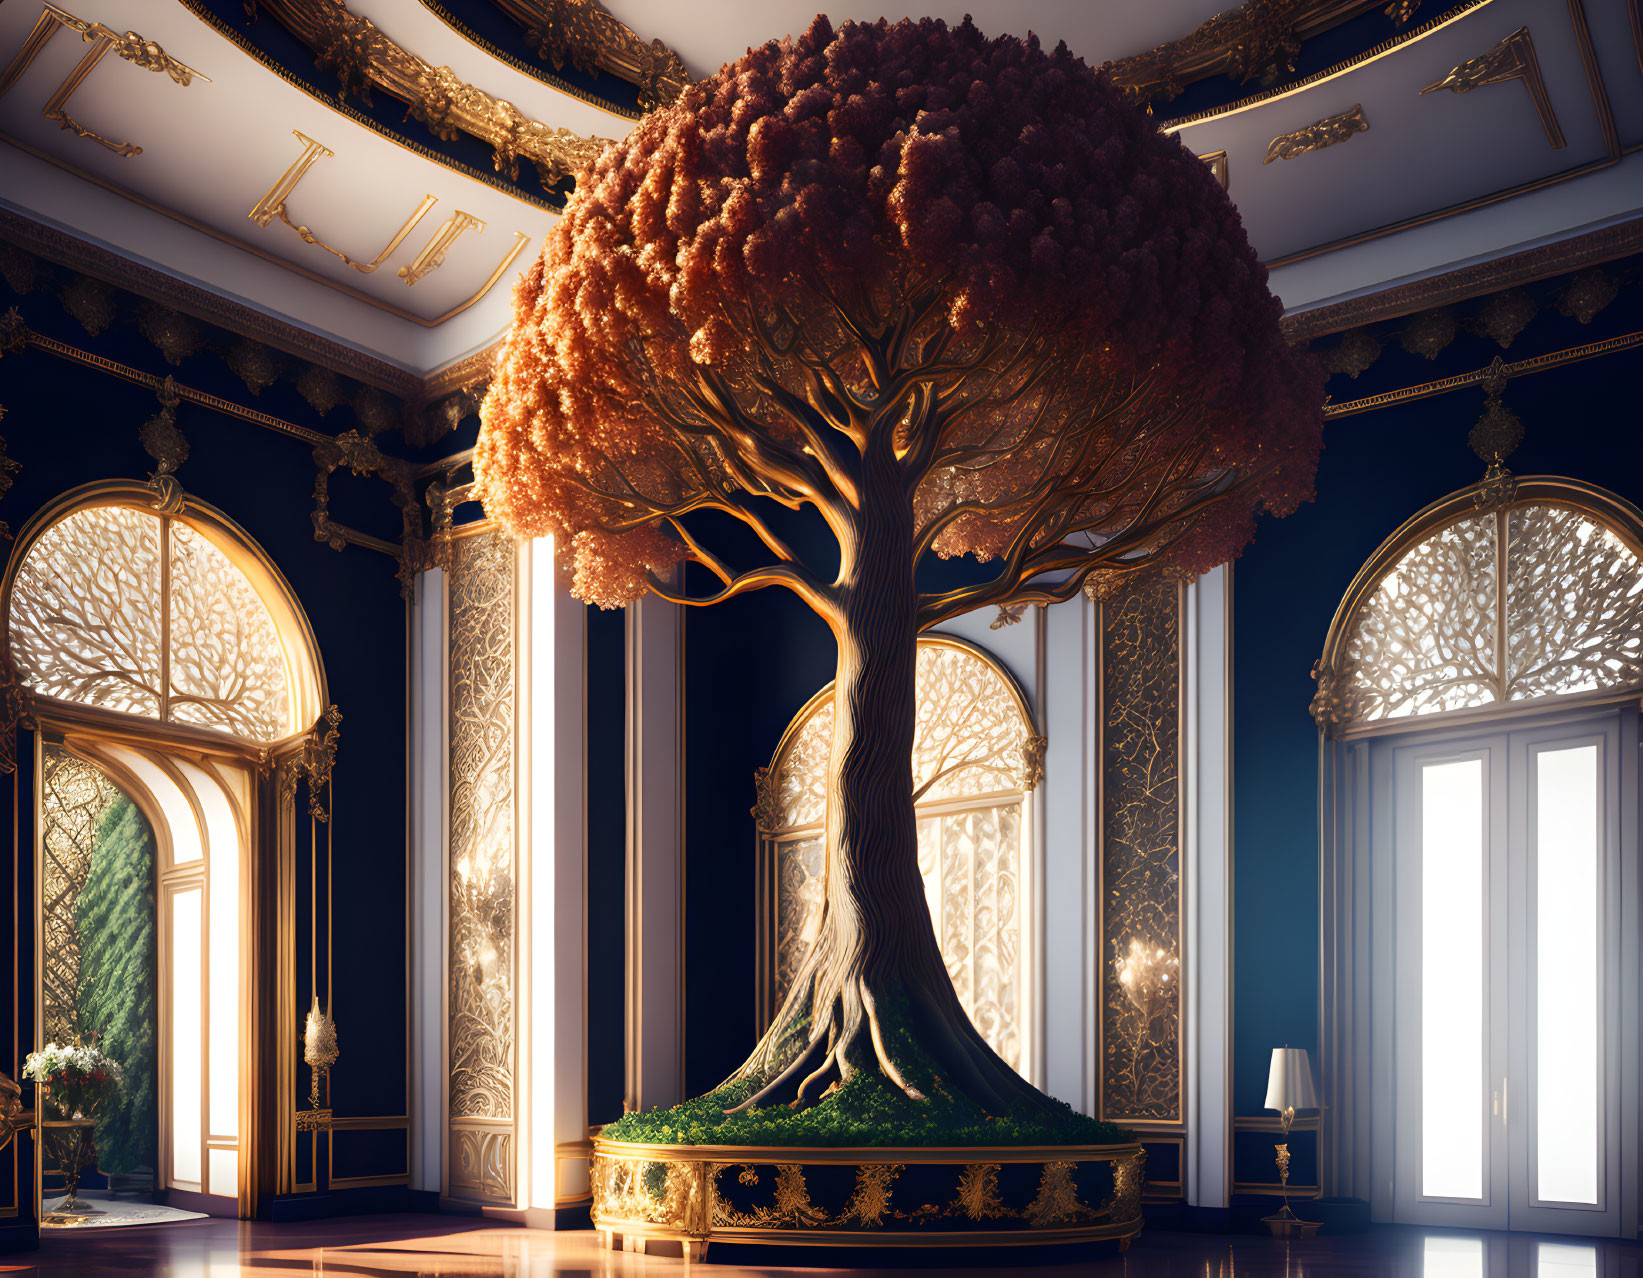 Majestic tree in opulent room with gold-trimmed arches